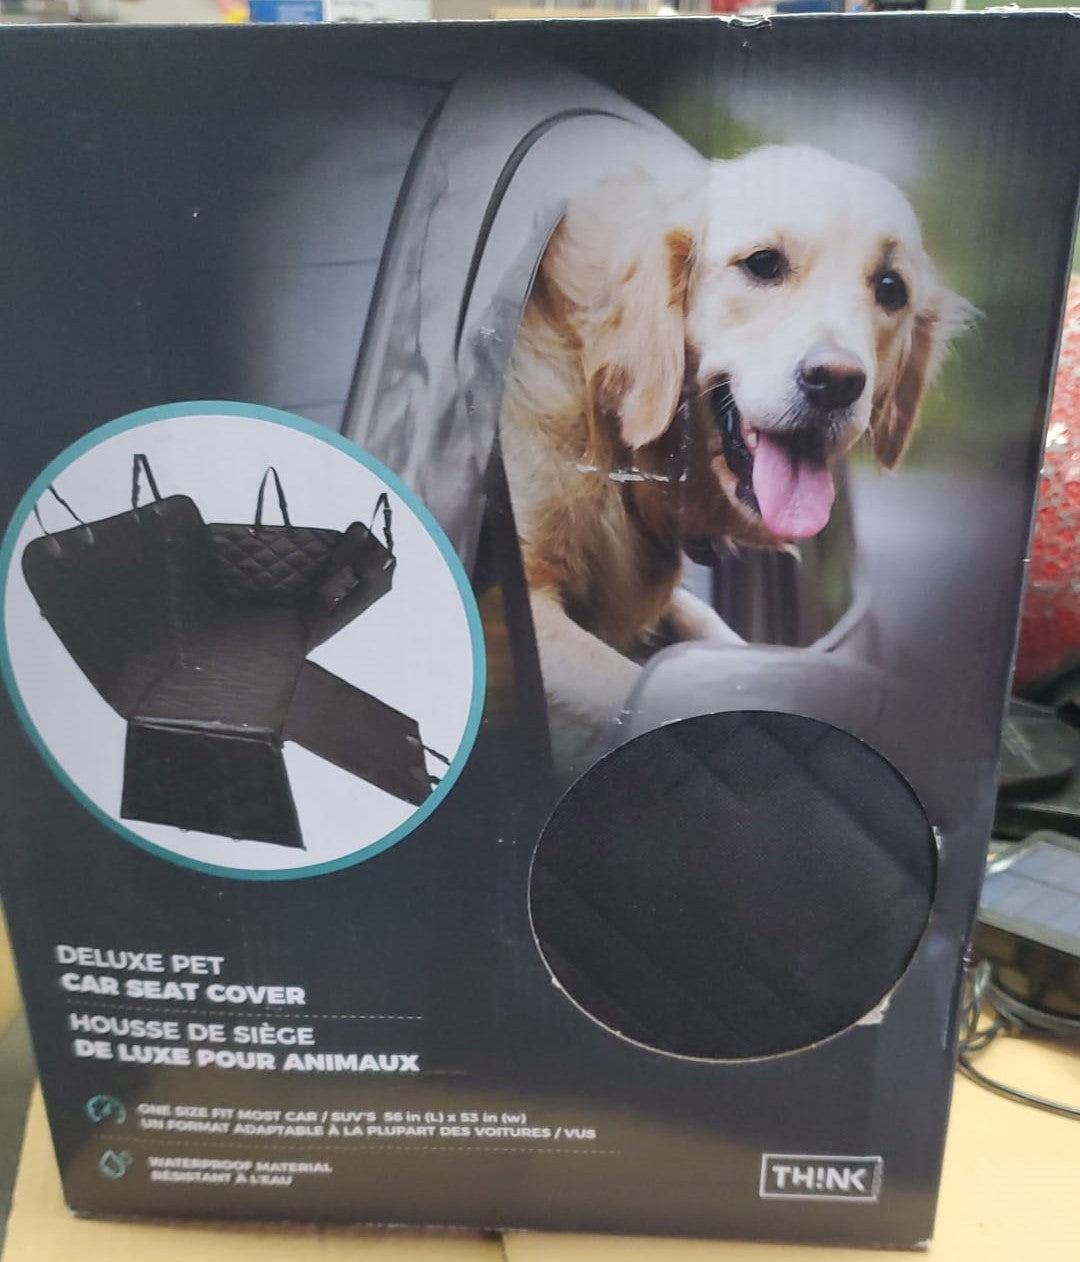 DELUXE PET CAR SEAT COVER